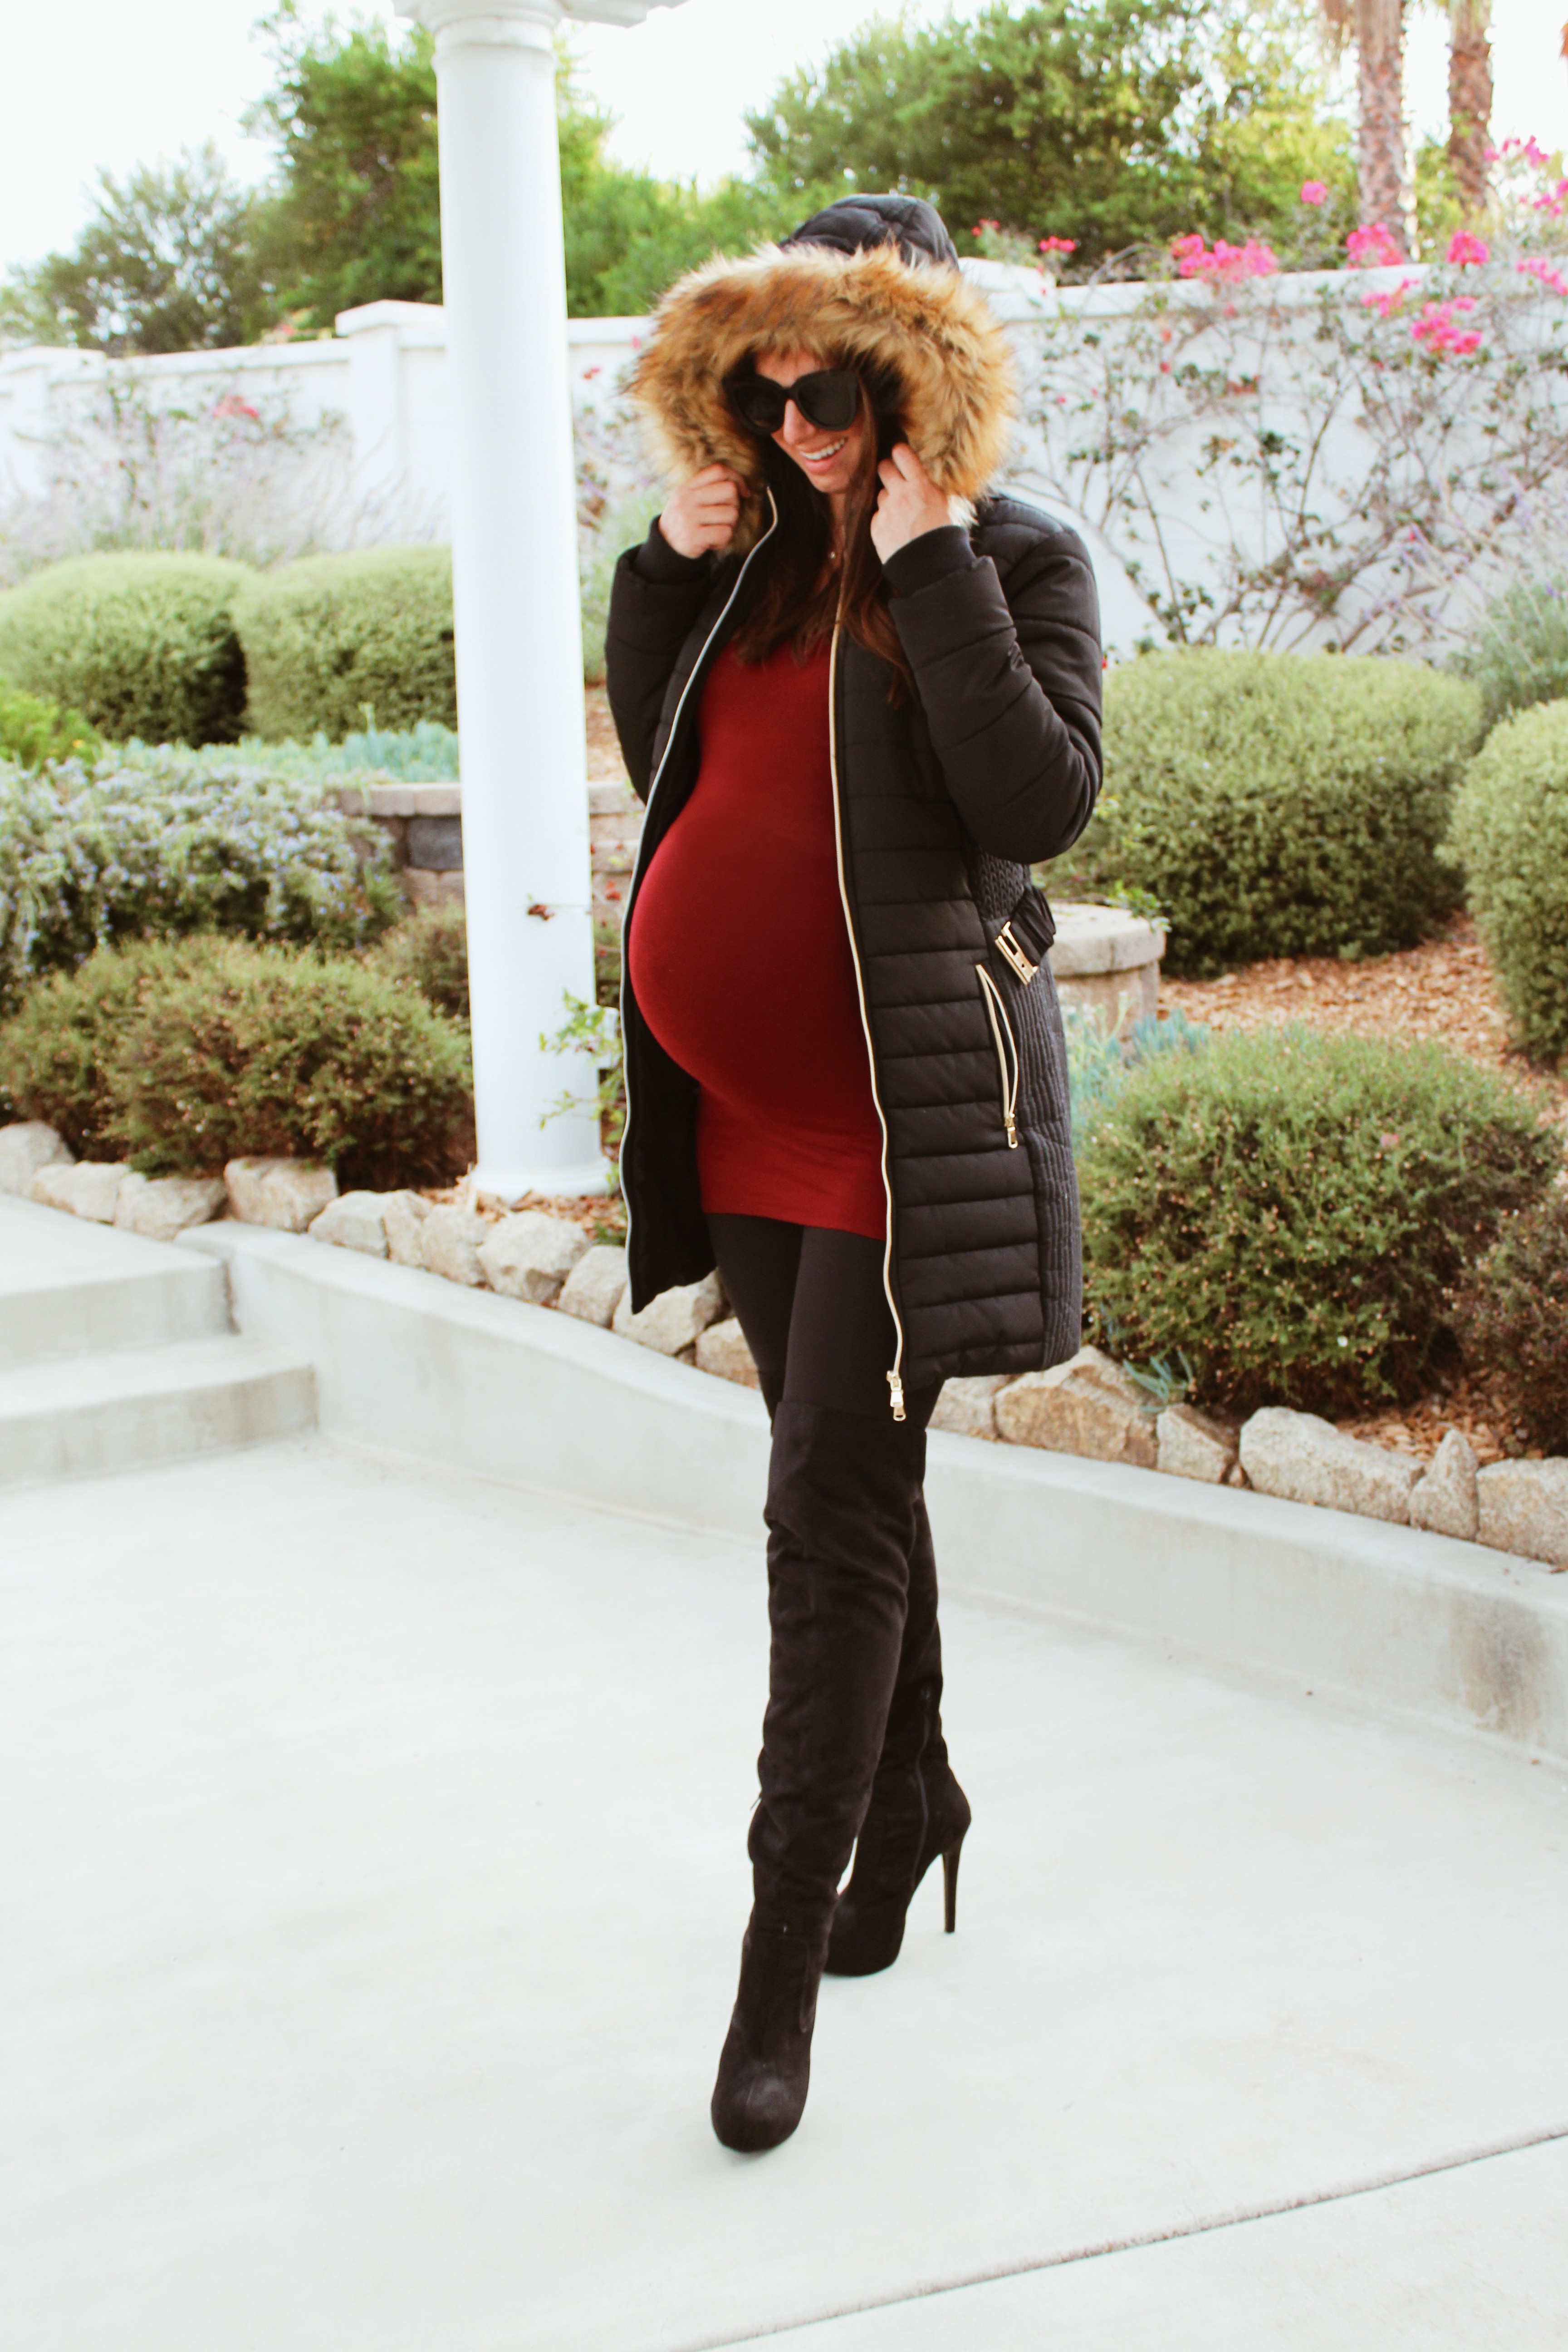 Pregnant-Dresses  Fall maternity outfits, Winter maternity outfits,  Stylish maternity outfits